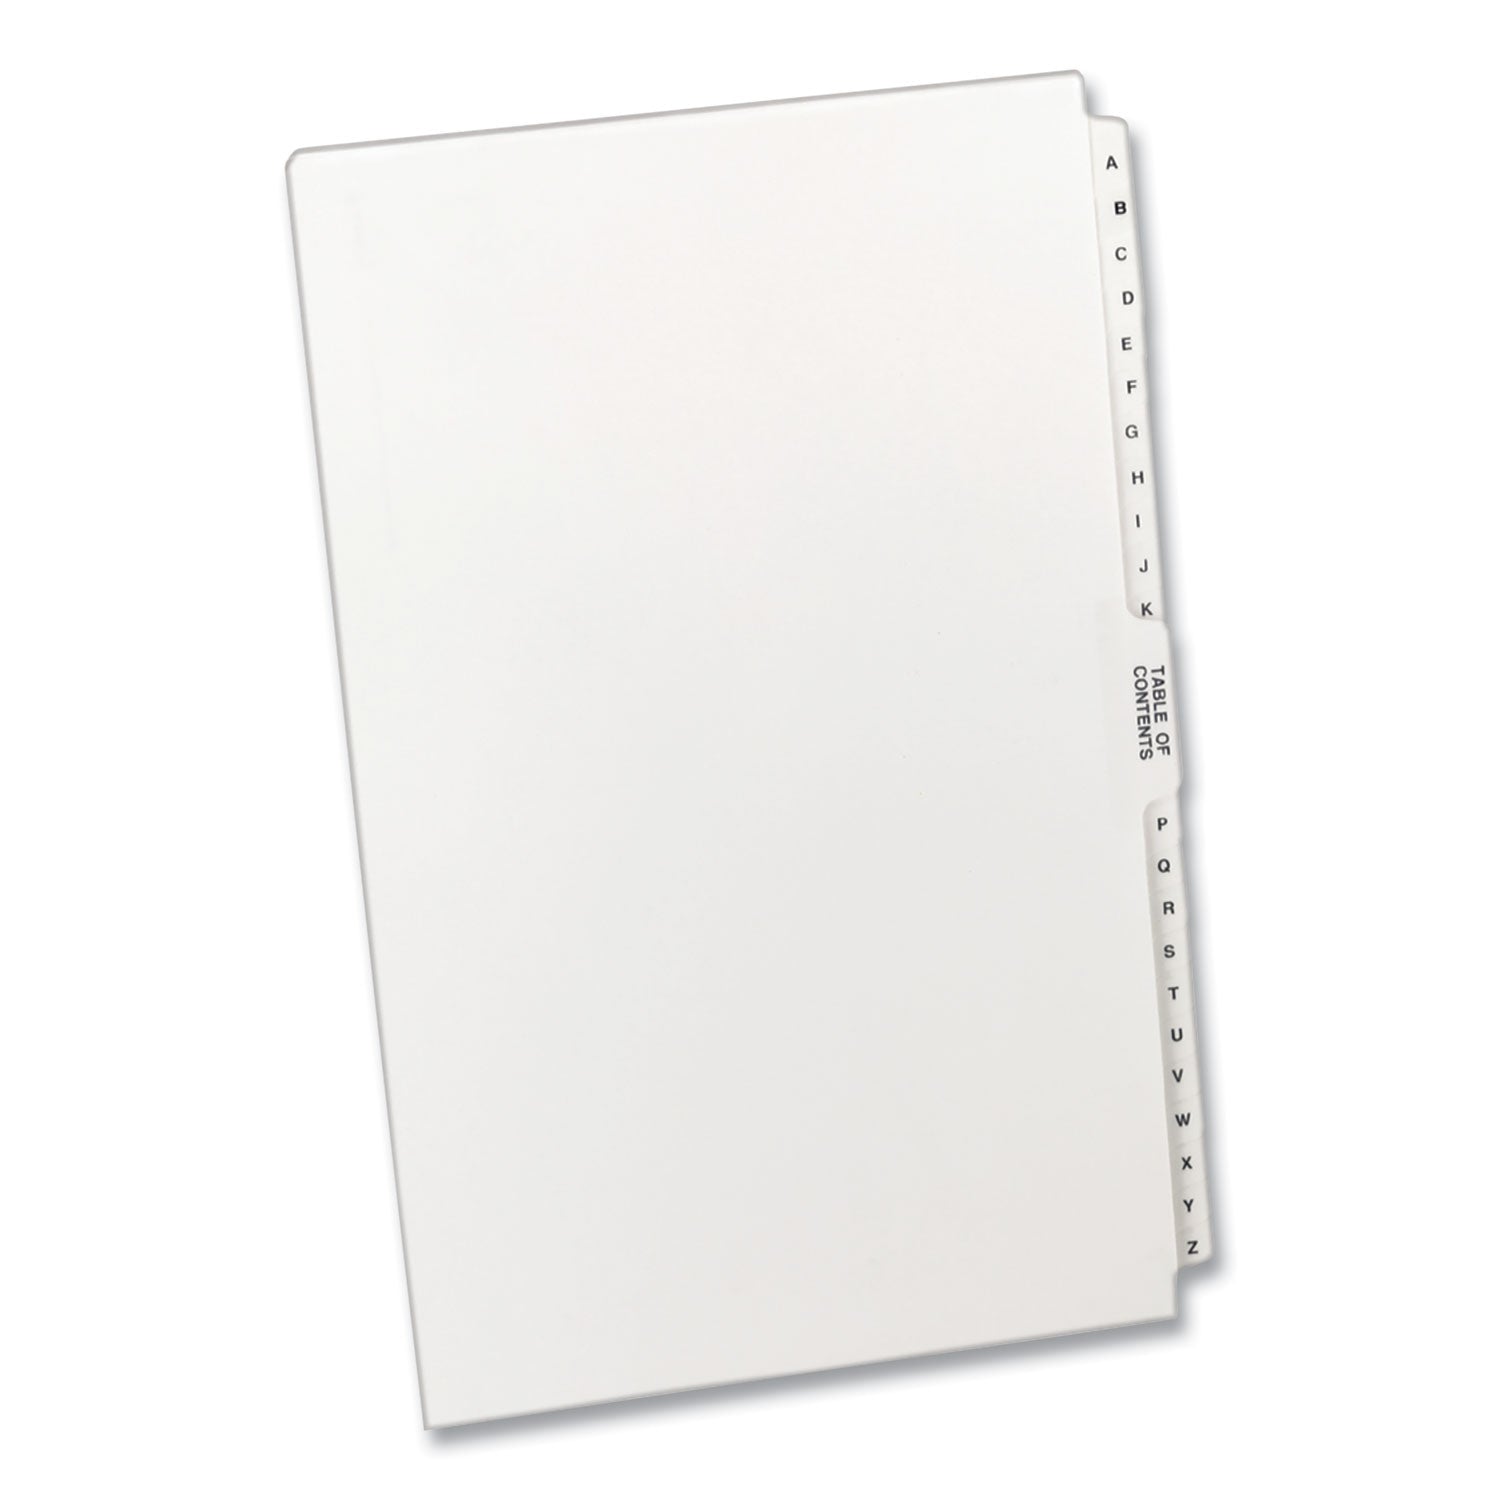 Preprinted Legal Exhibit Side Tab Index Dividers, Avery Style, 27-Tab, A to Z, 14 x 8.5, White, 1 Set - 